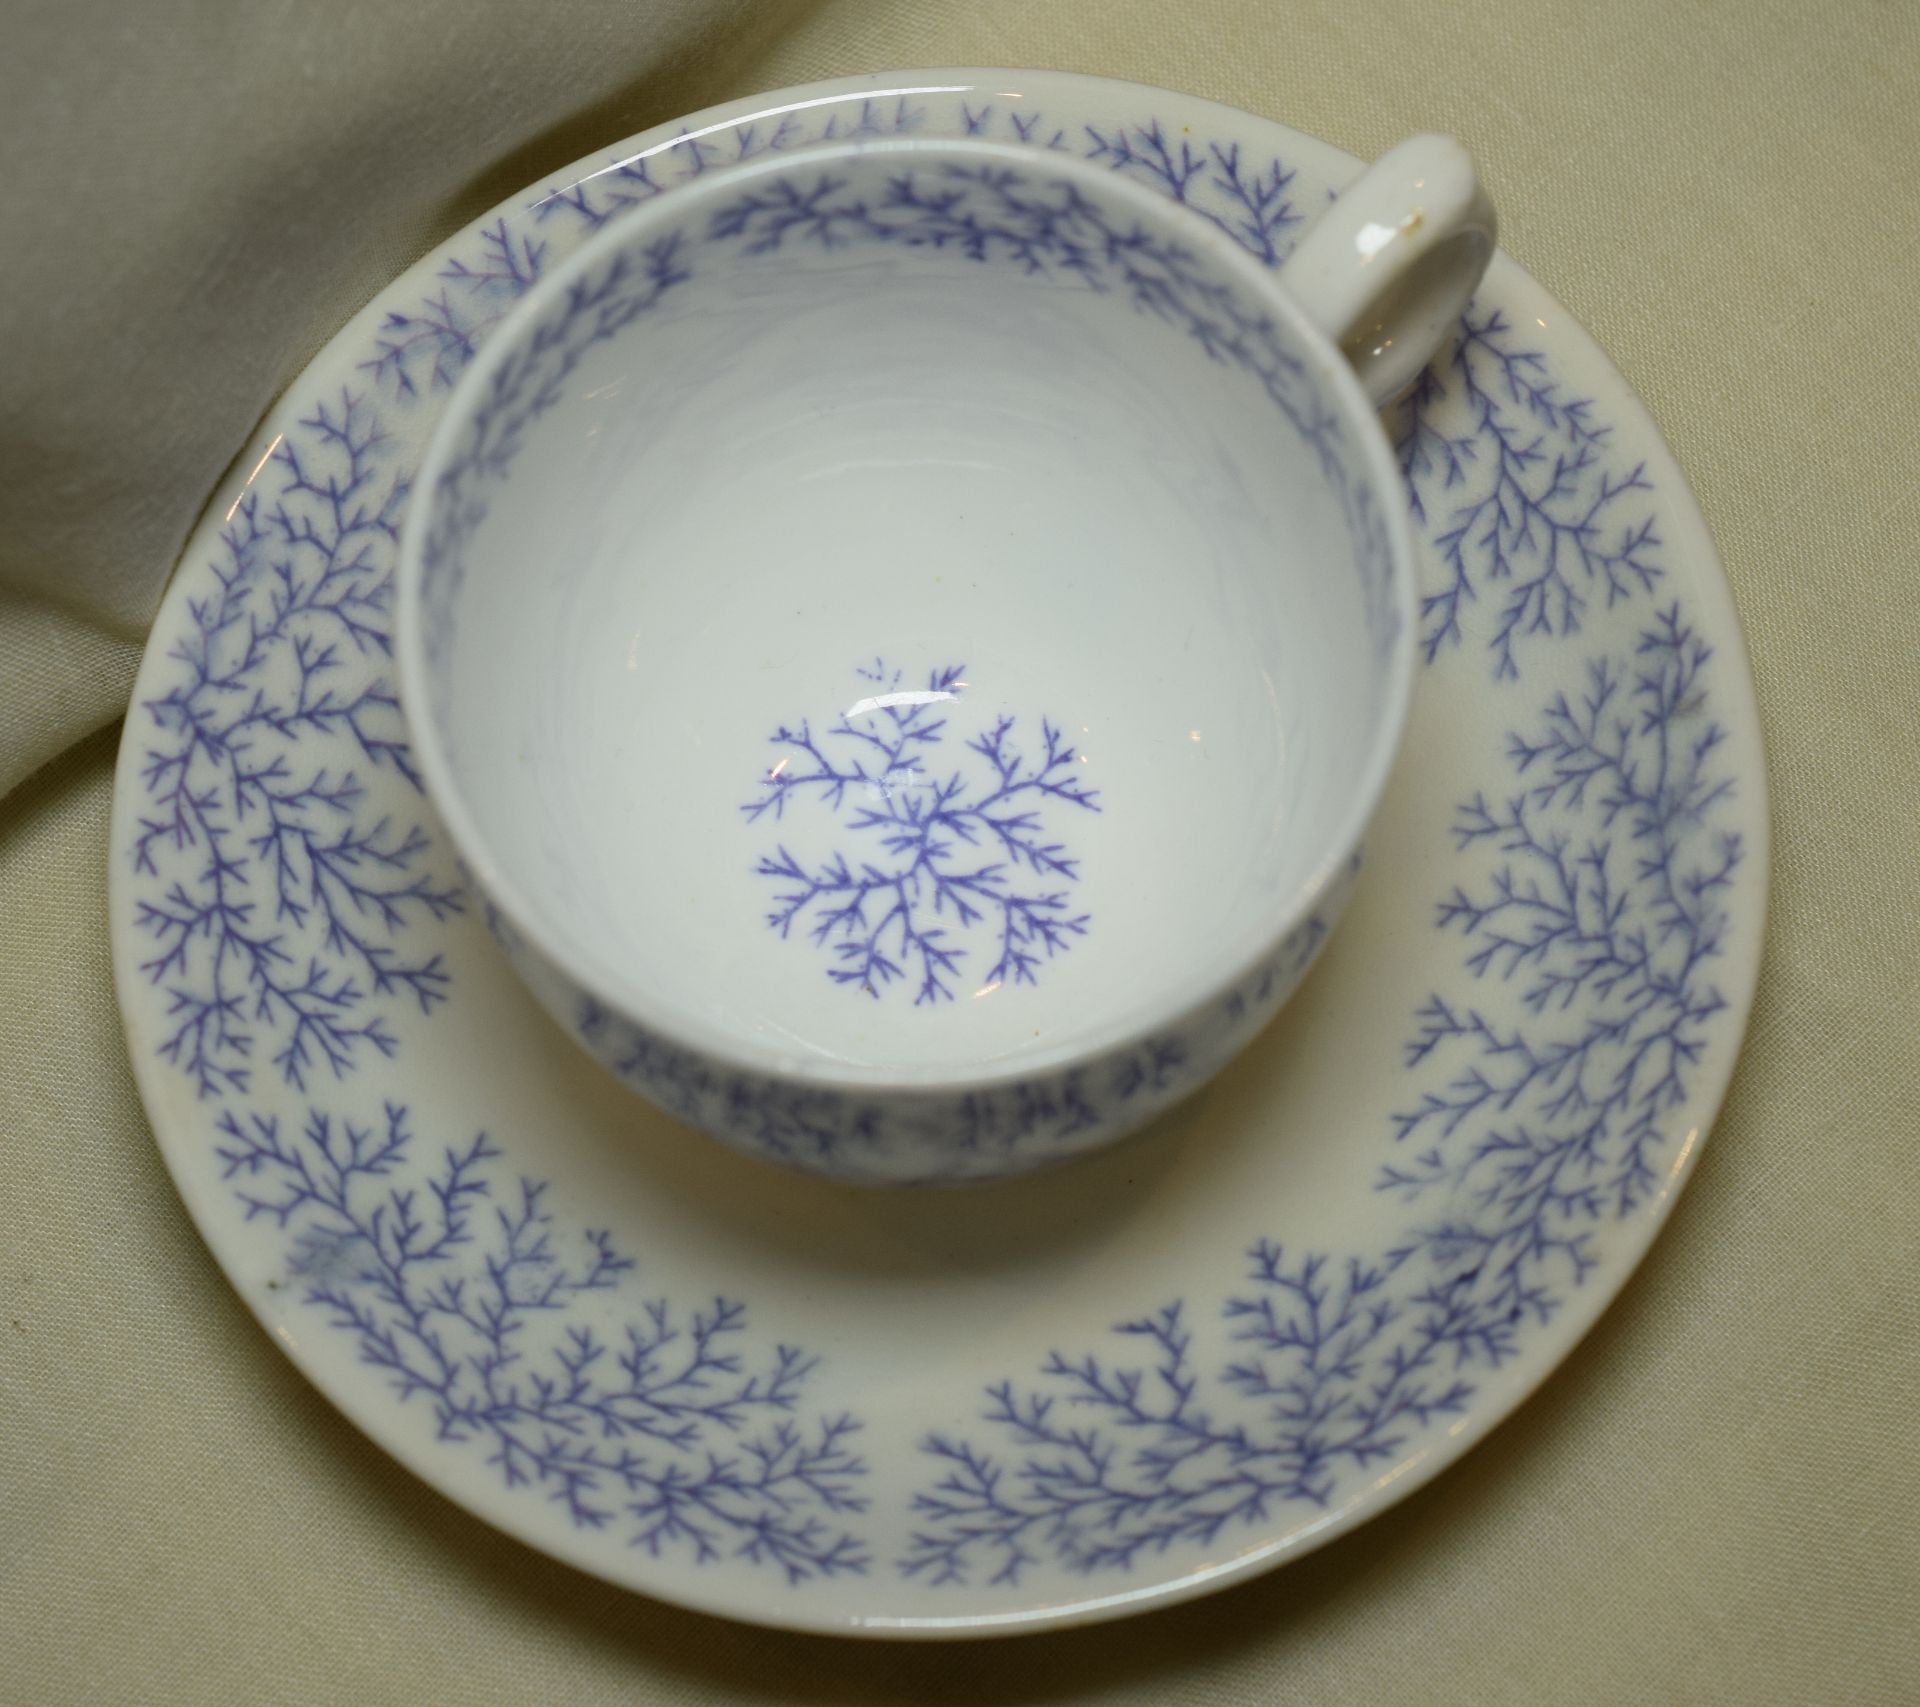 Swansea Blue And White Sprig Design Translucent Cup And Saucer c1850s